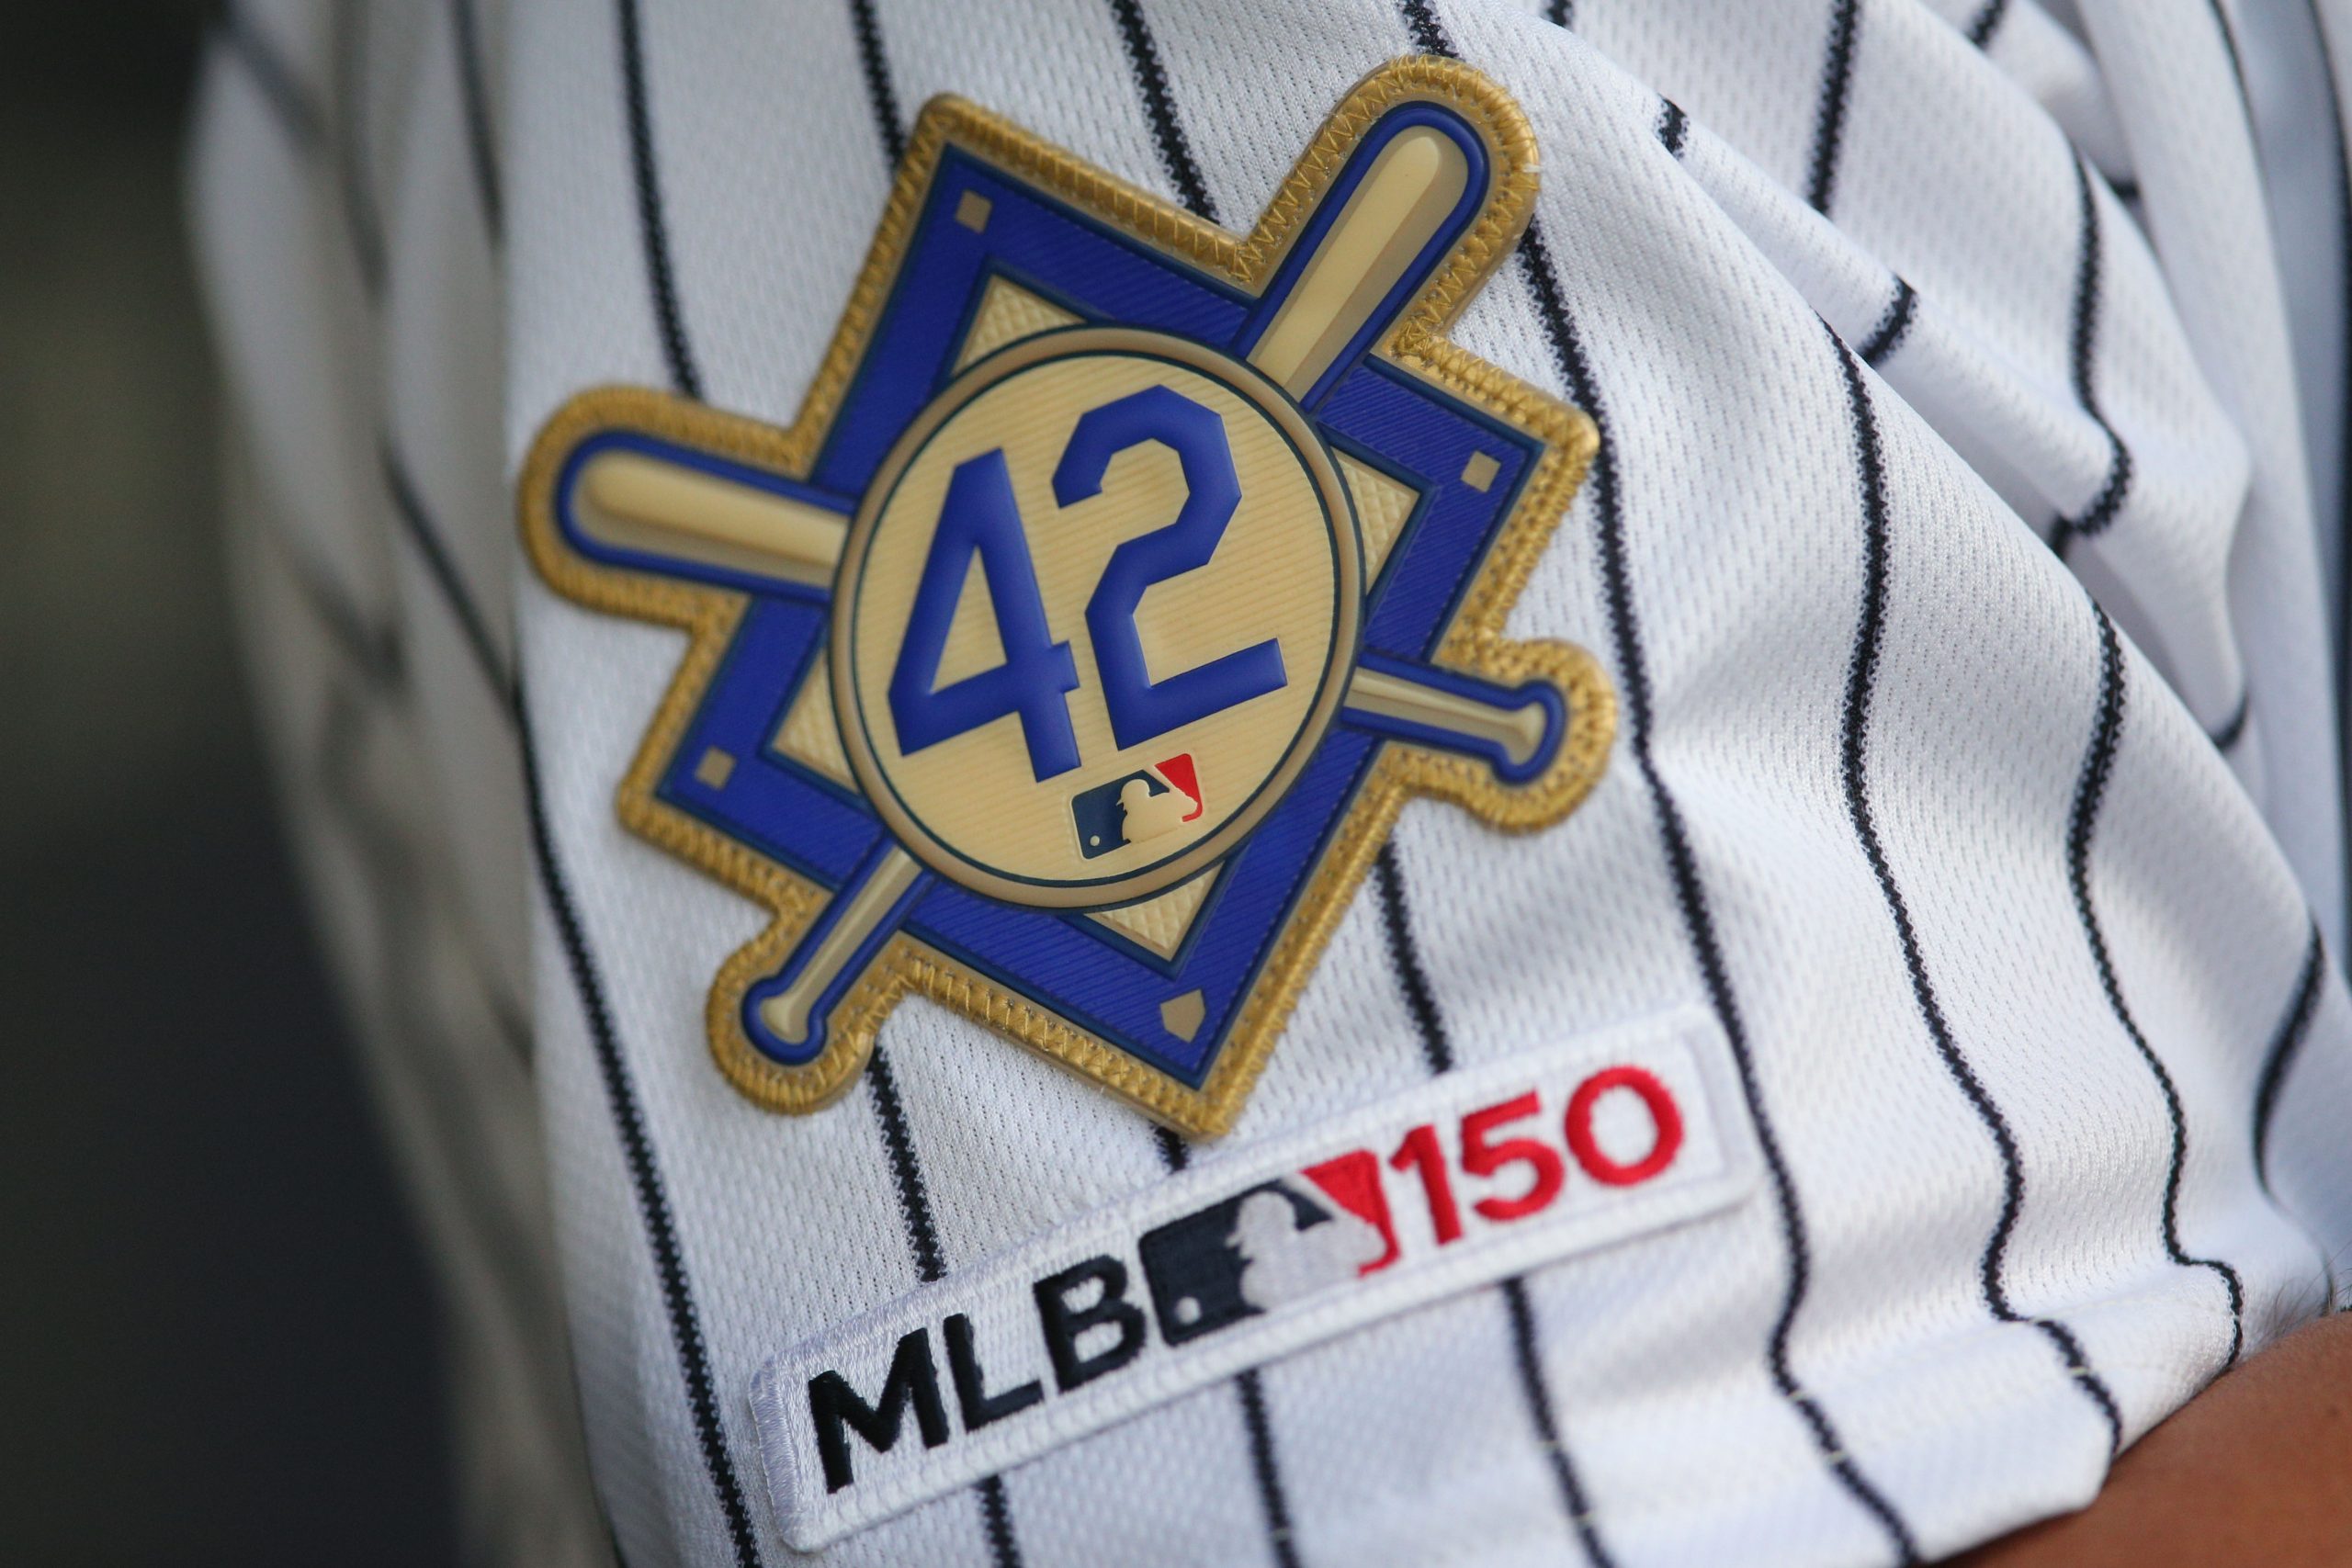 Jackie Robinson day celebrated across all of MLB